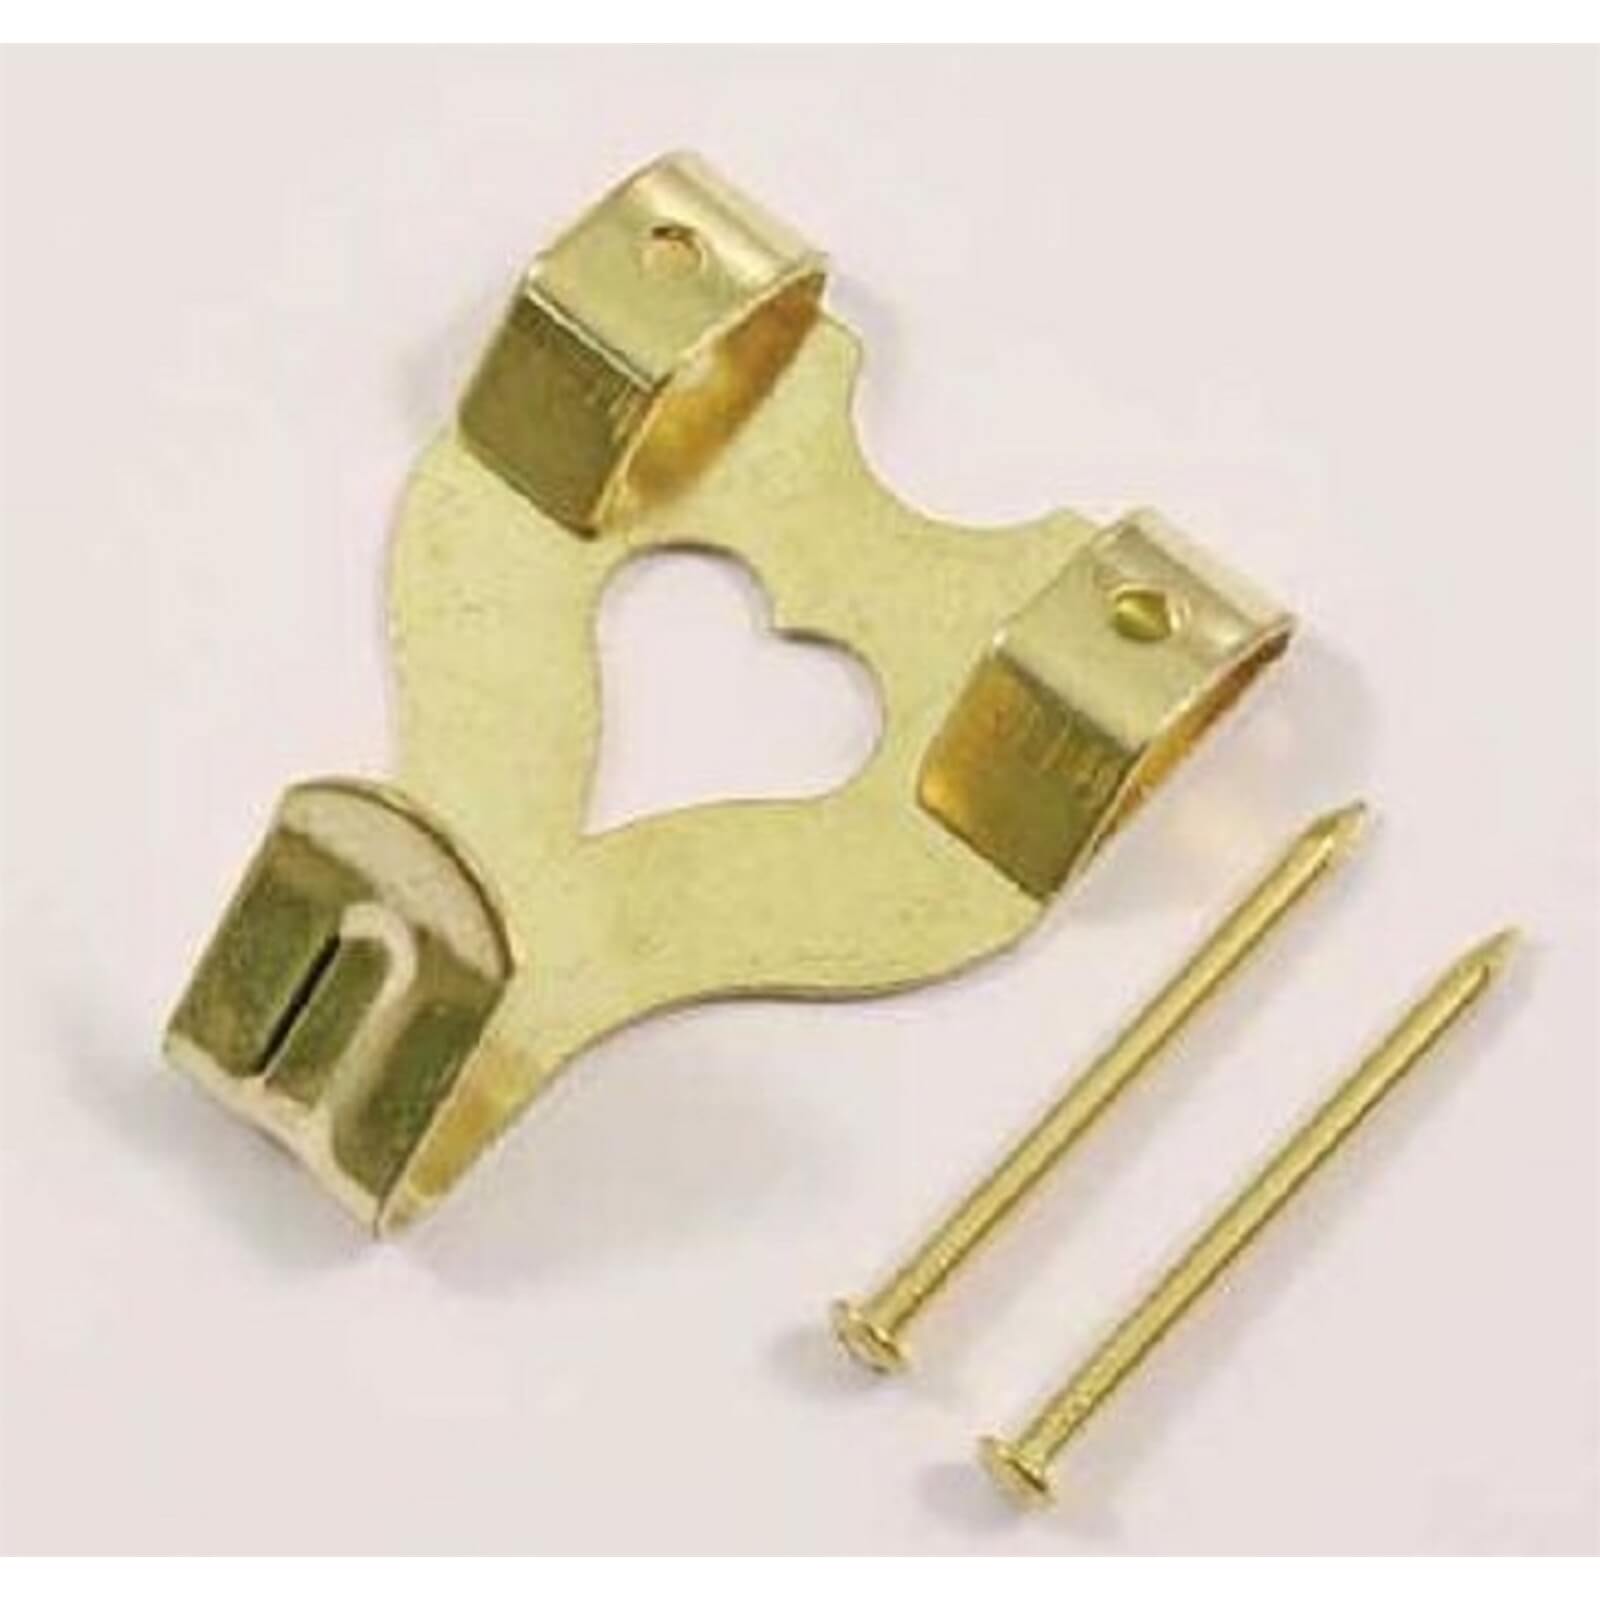 Photo of Large Picture Hook - Brass - 2 Pack